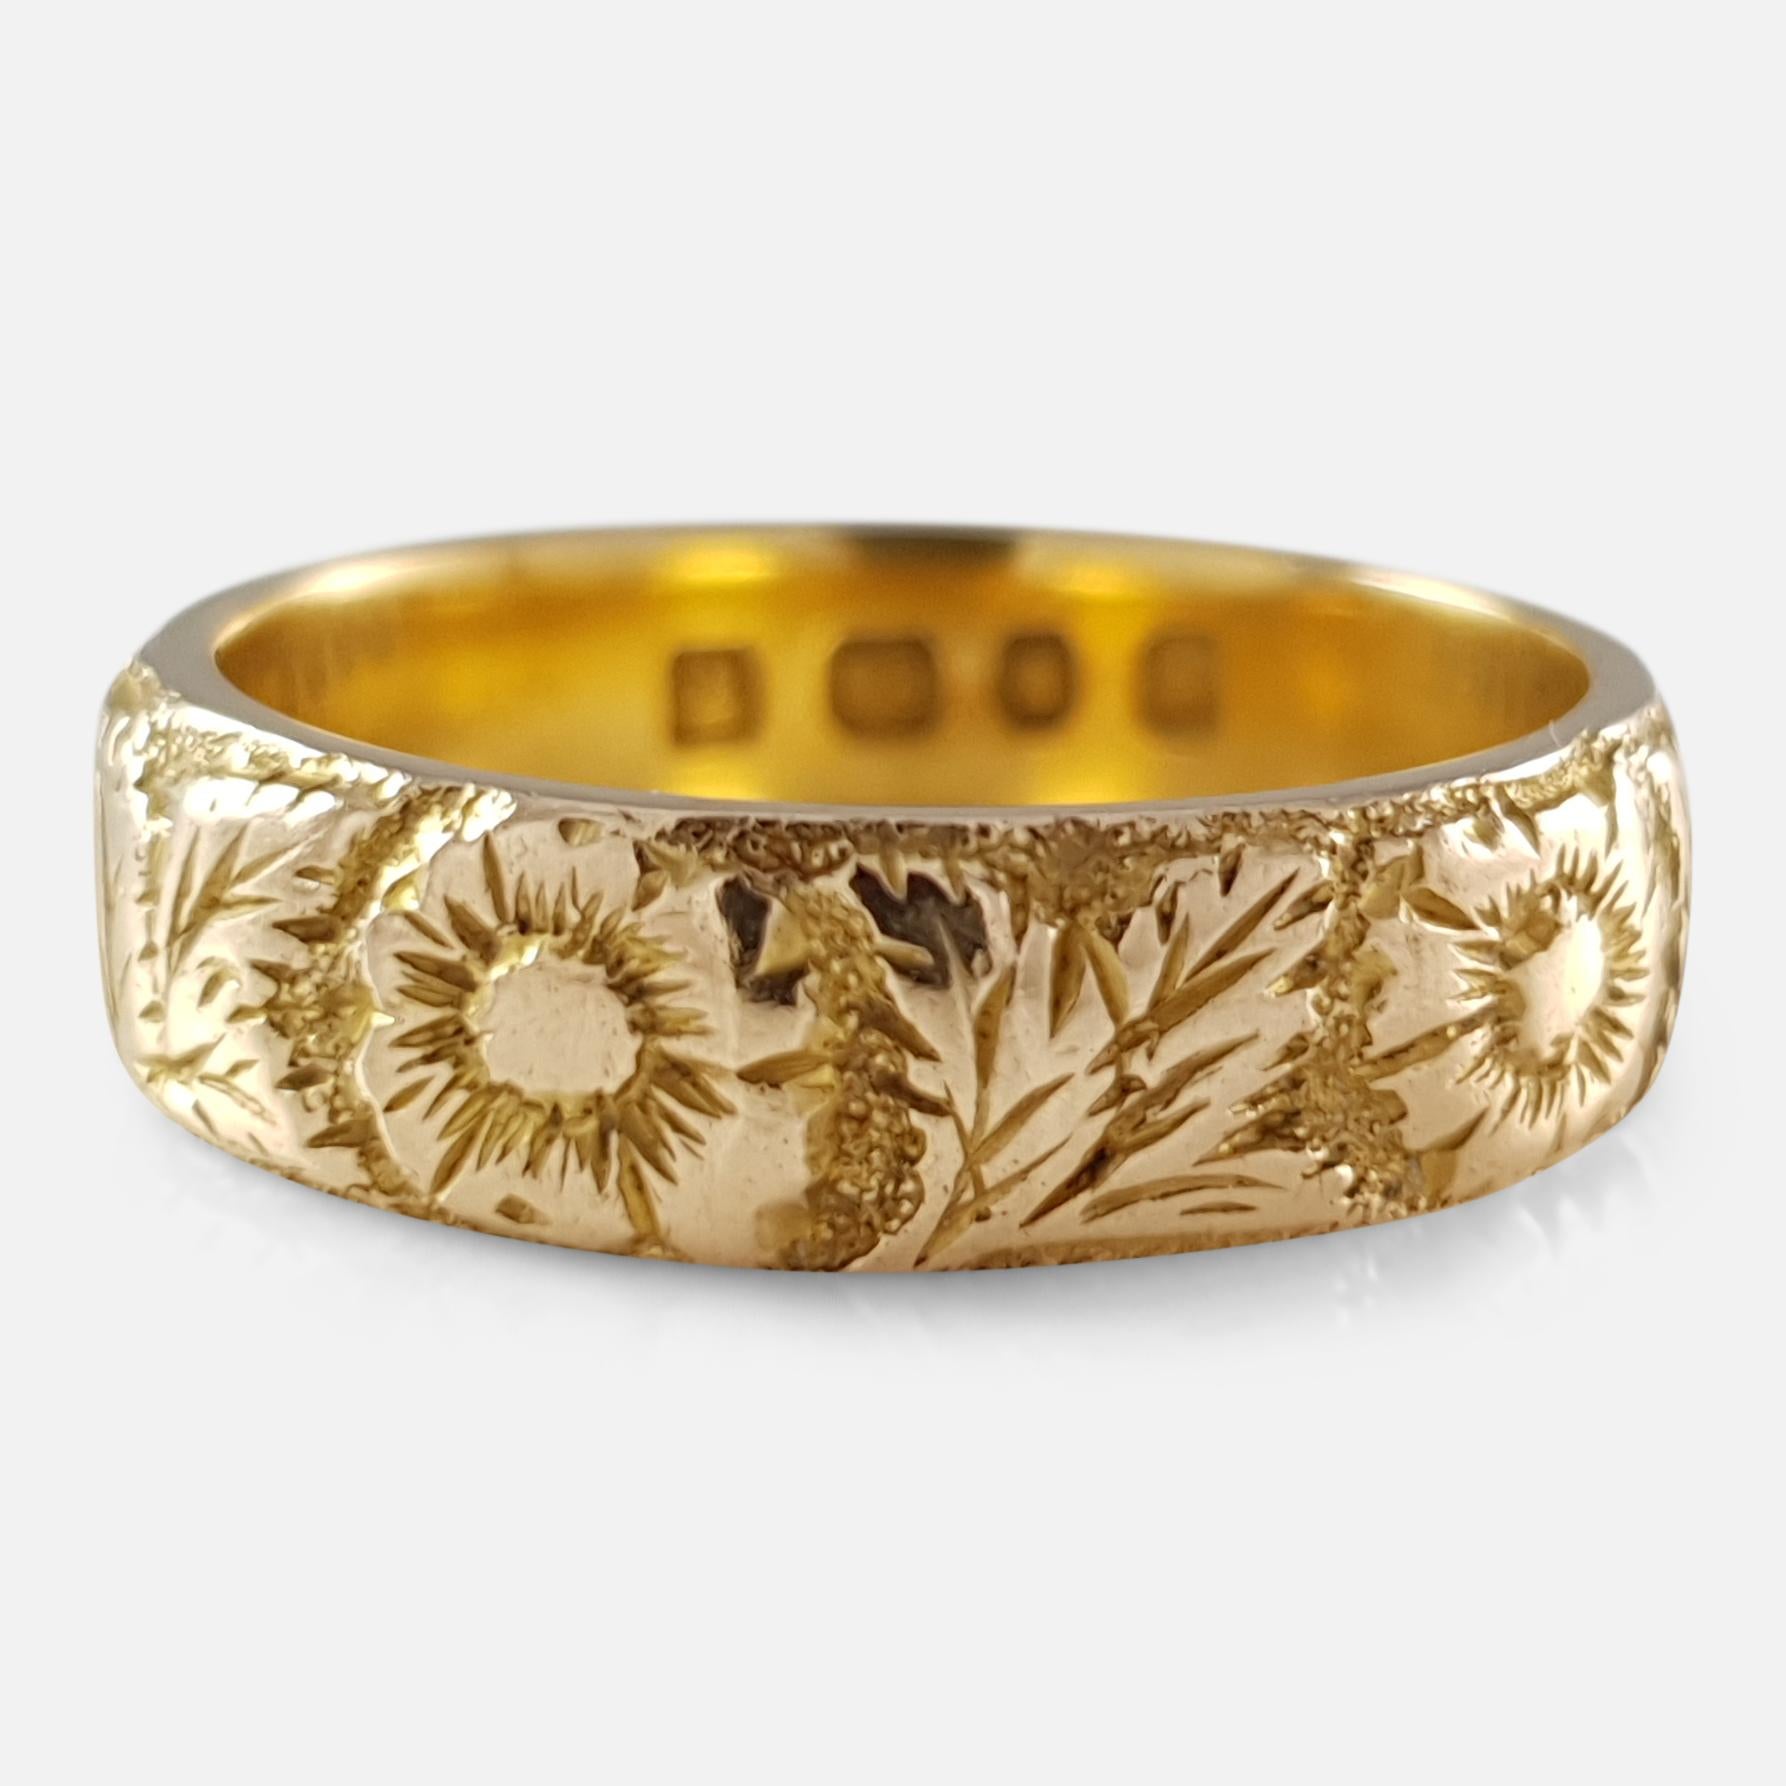 Description: - A superb antique Victorian 18 karat yellow gold floral engraved wedding band ring. The ring is fully hallmarked with the London Assay office stamp, 